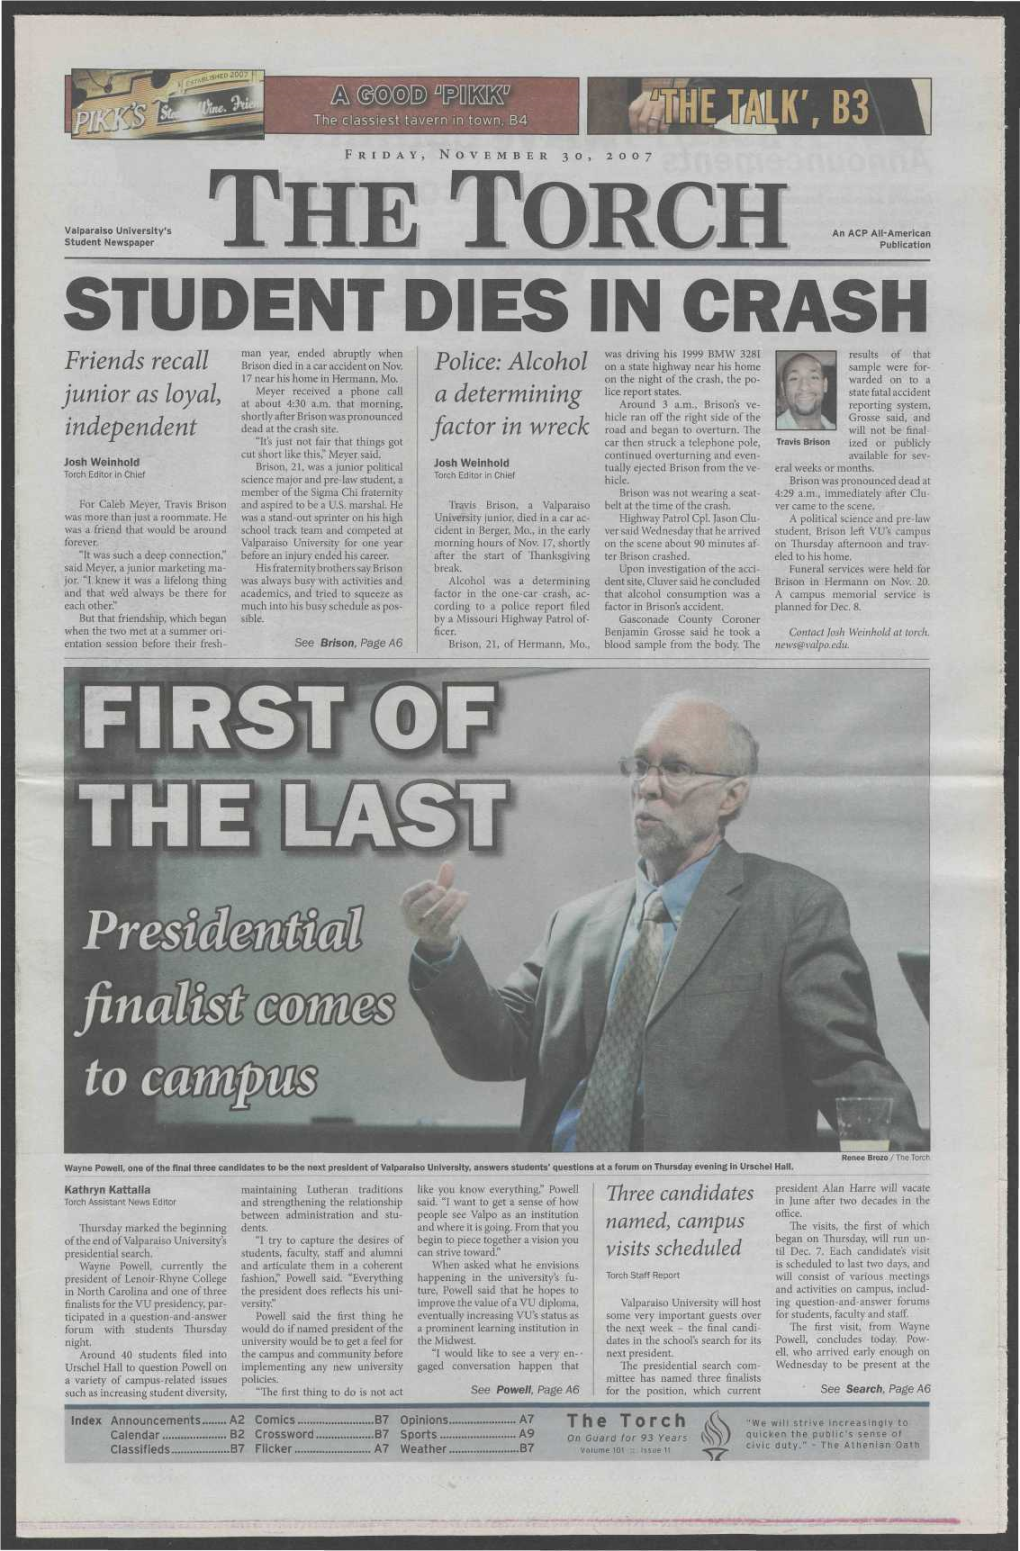 STUDENT DIES in CRASH Man Year, Ended Abruptly When Was Driving His 1999 BMW 3281 Results of That Friends Recall Brison Died in a Car Accident on Nov